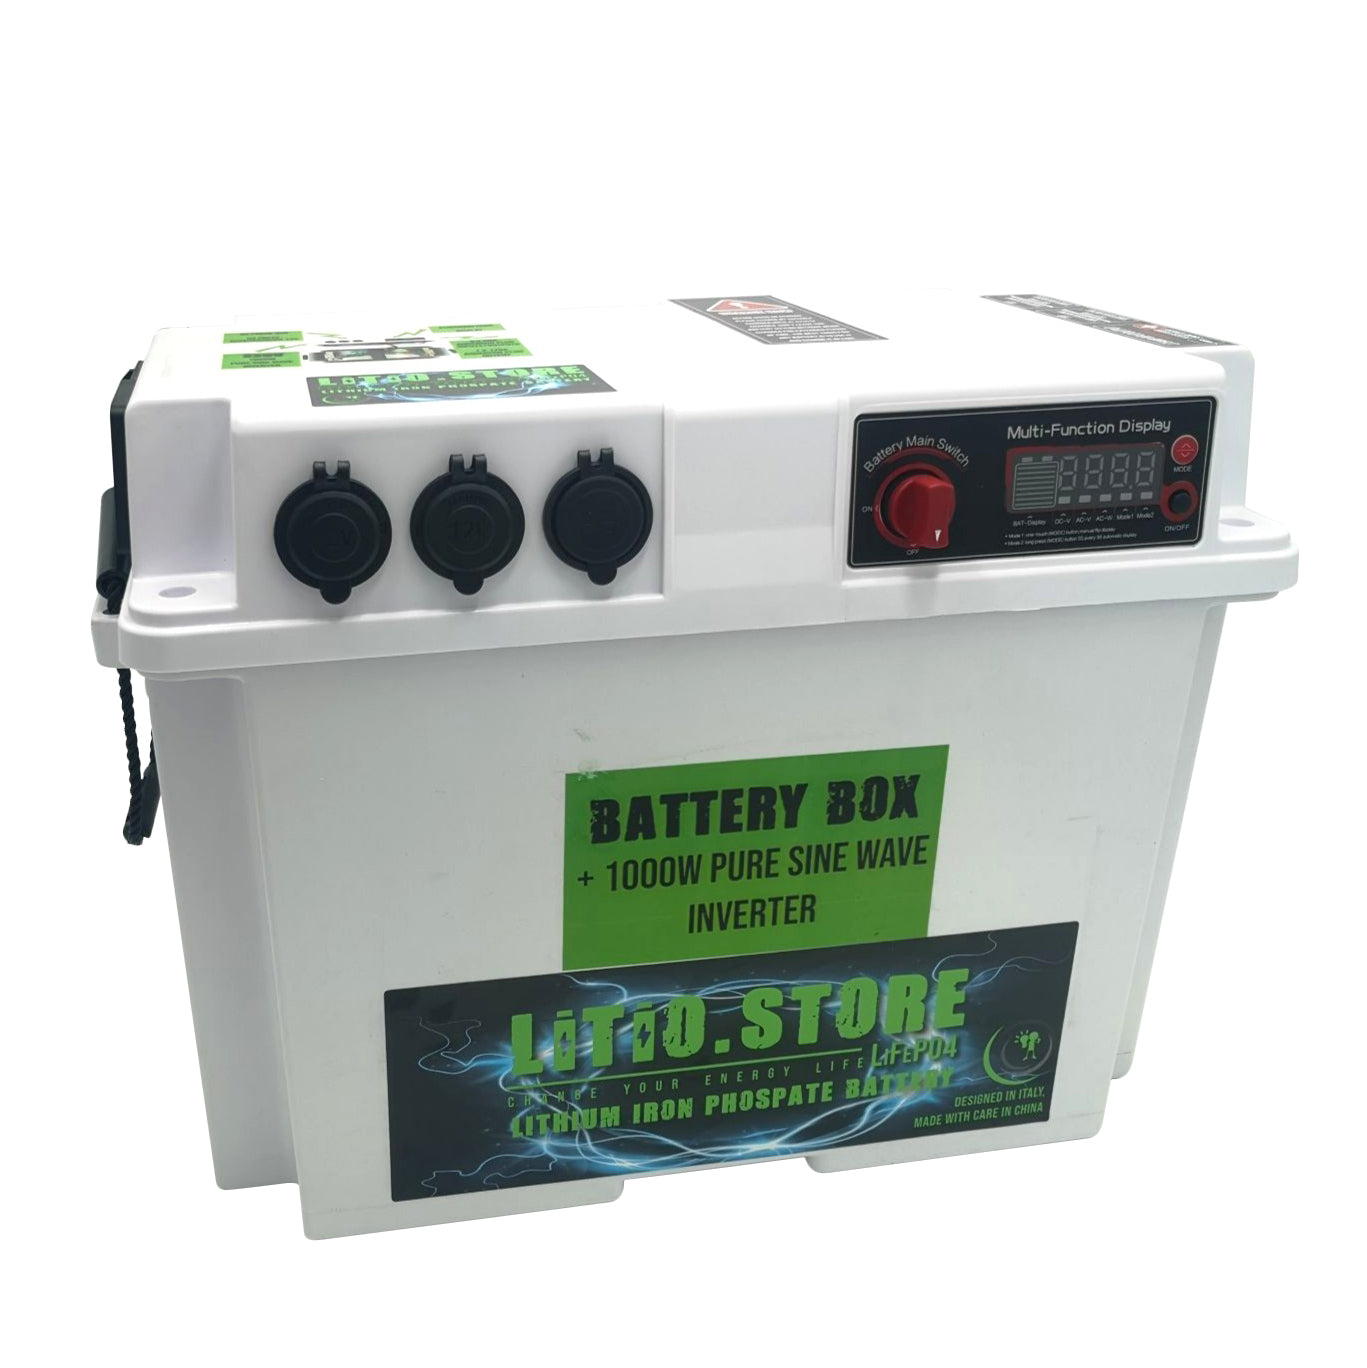 Lithium Store Battery-Box 12V with 1000W Integrated pure wave inverter - 220V 12V 5V USB sockets - for Lithium/Gel/AGM batteries (battery not included)